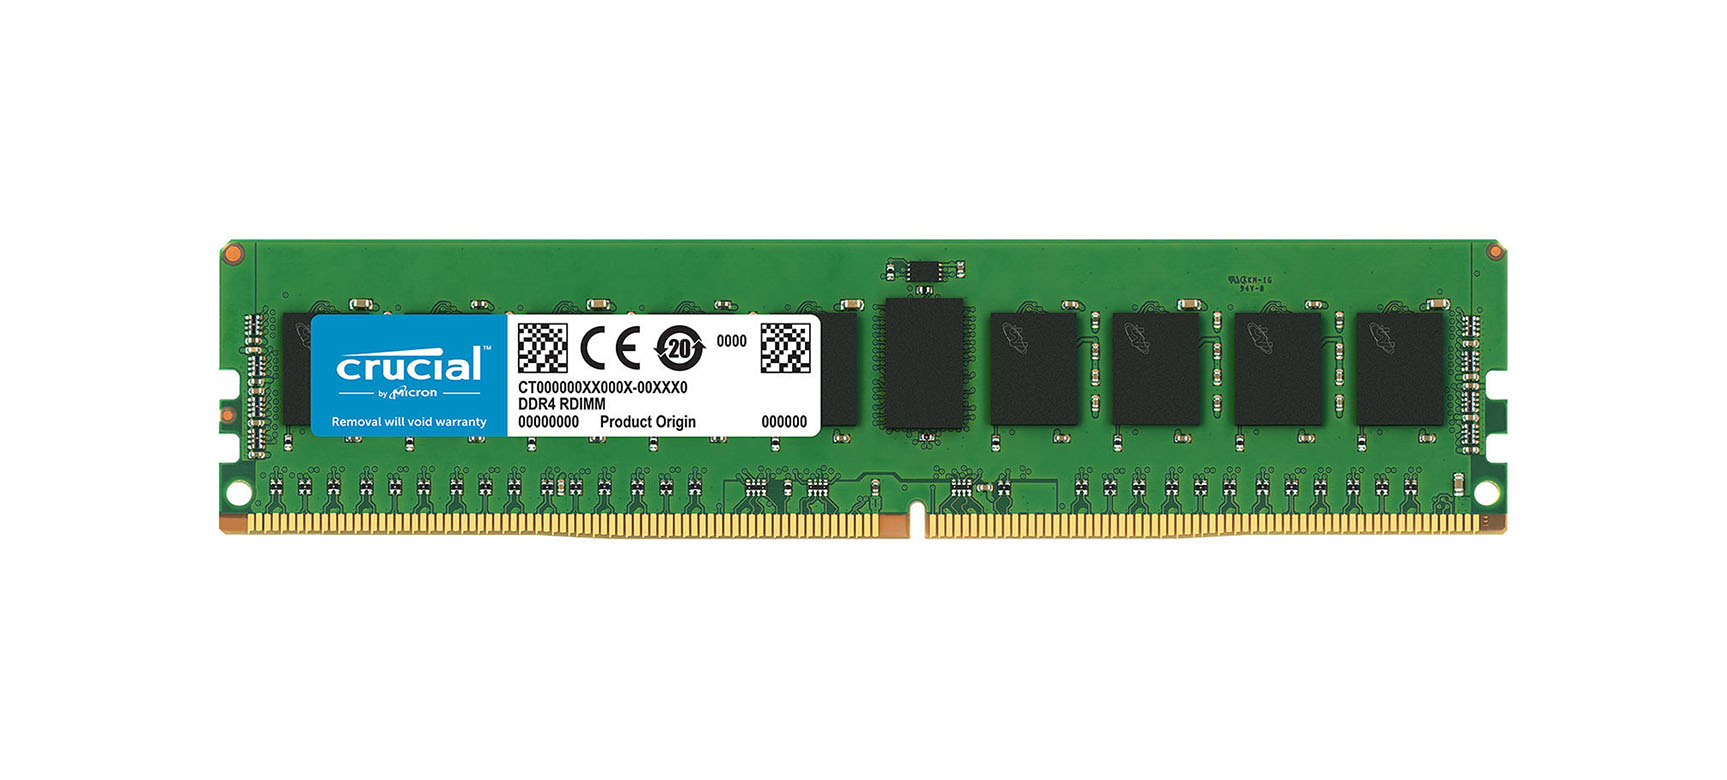 Crucial CT7742762 16GB DDR4-2400MHz PC4-19200 ECC Registered CL17 288-Pin DIMM Single Rank Very Low Profile (VLP) Memory Module Upgrade for HP - Compaq ProLiant DL560 Gen9